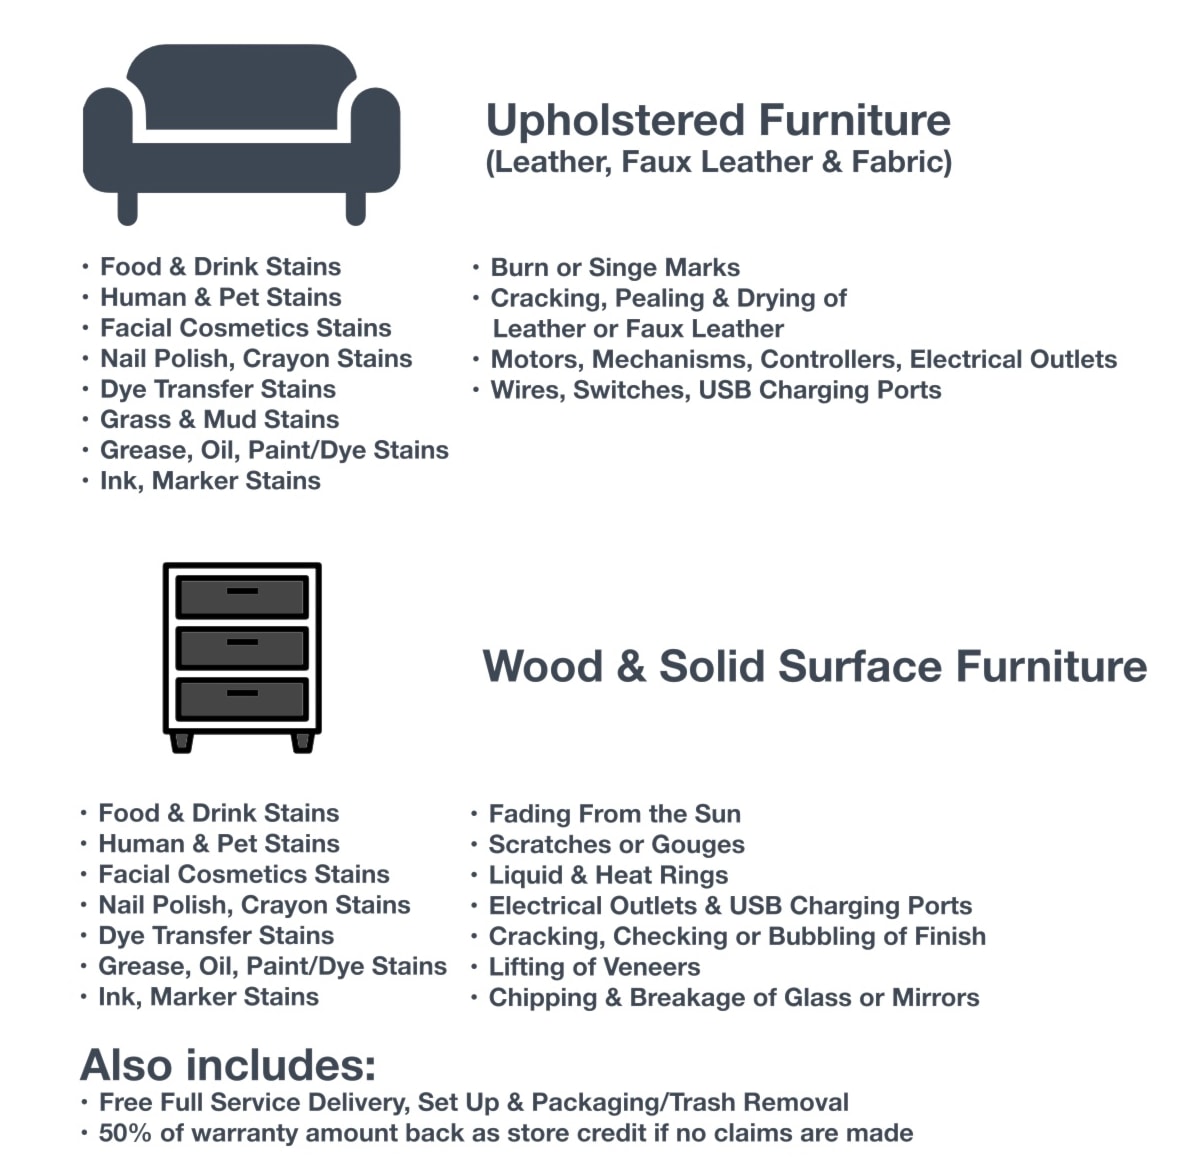 Upholstered Furniture and Wood & Solid Surface Furniture - Premium Plan